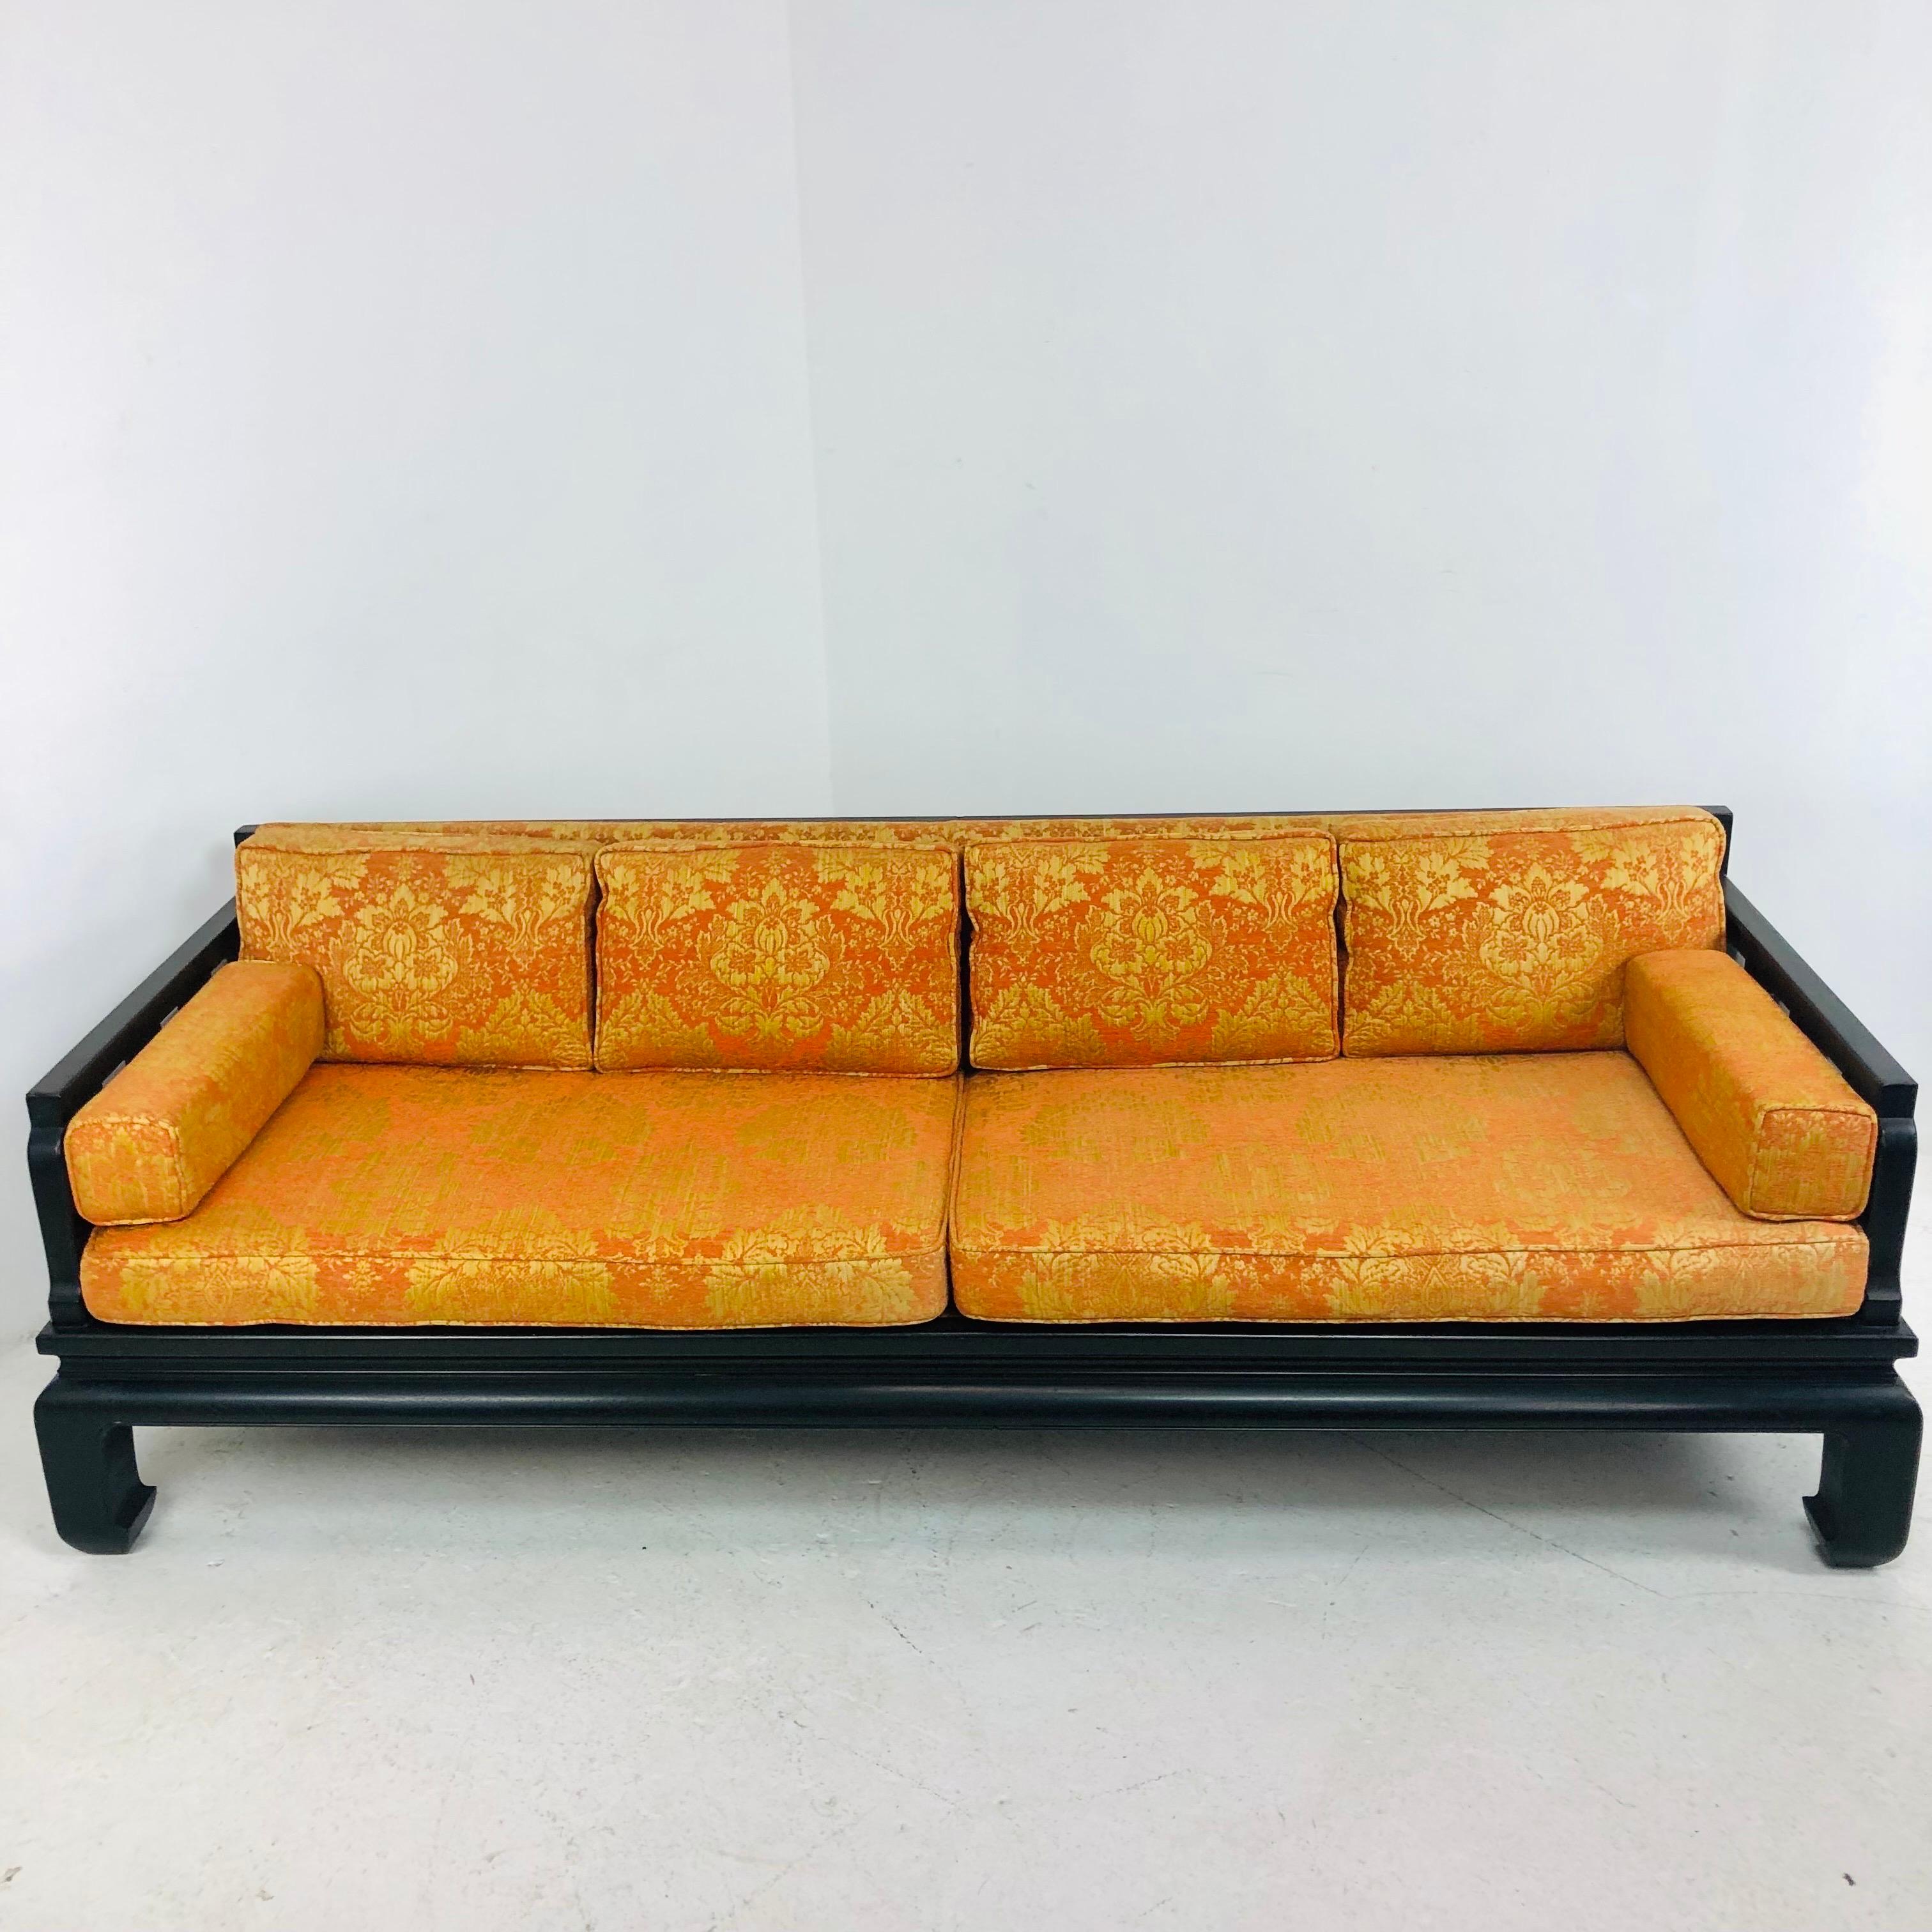 1970's ebonized oriental Ming inspired sofa in the manner of Michael Taylor for Baker Furniture. Original finish & silk upholstery - new fill is needed for cushions due to age. Some wear to finish, see photos for details.